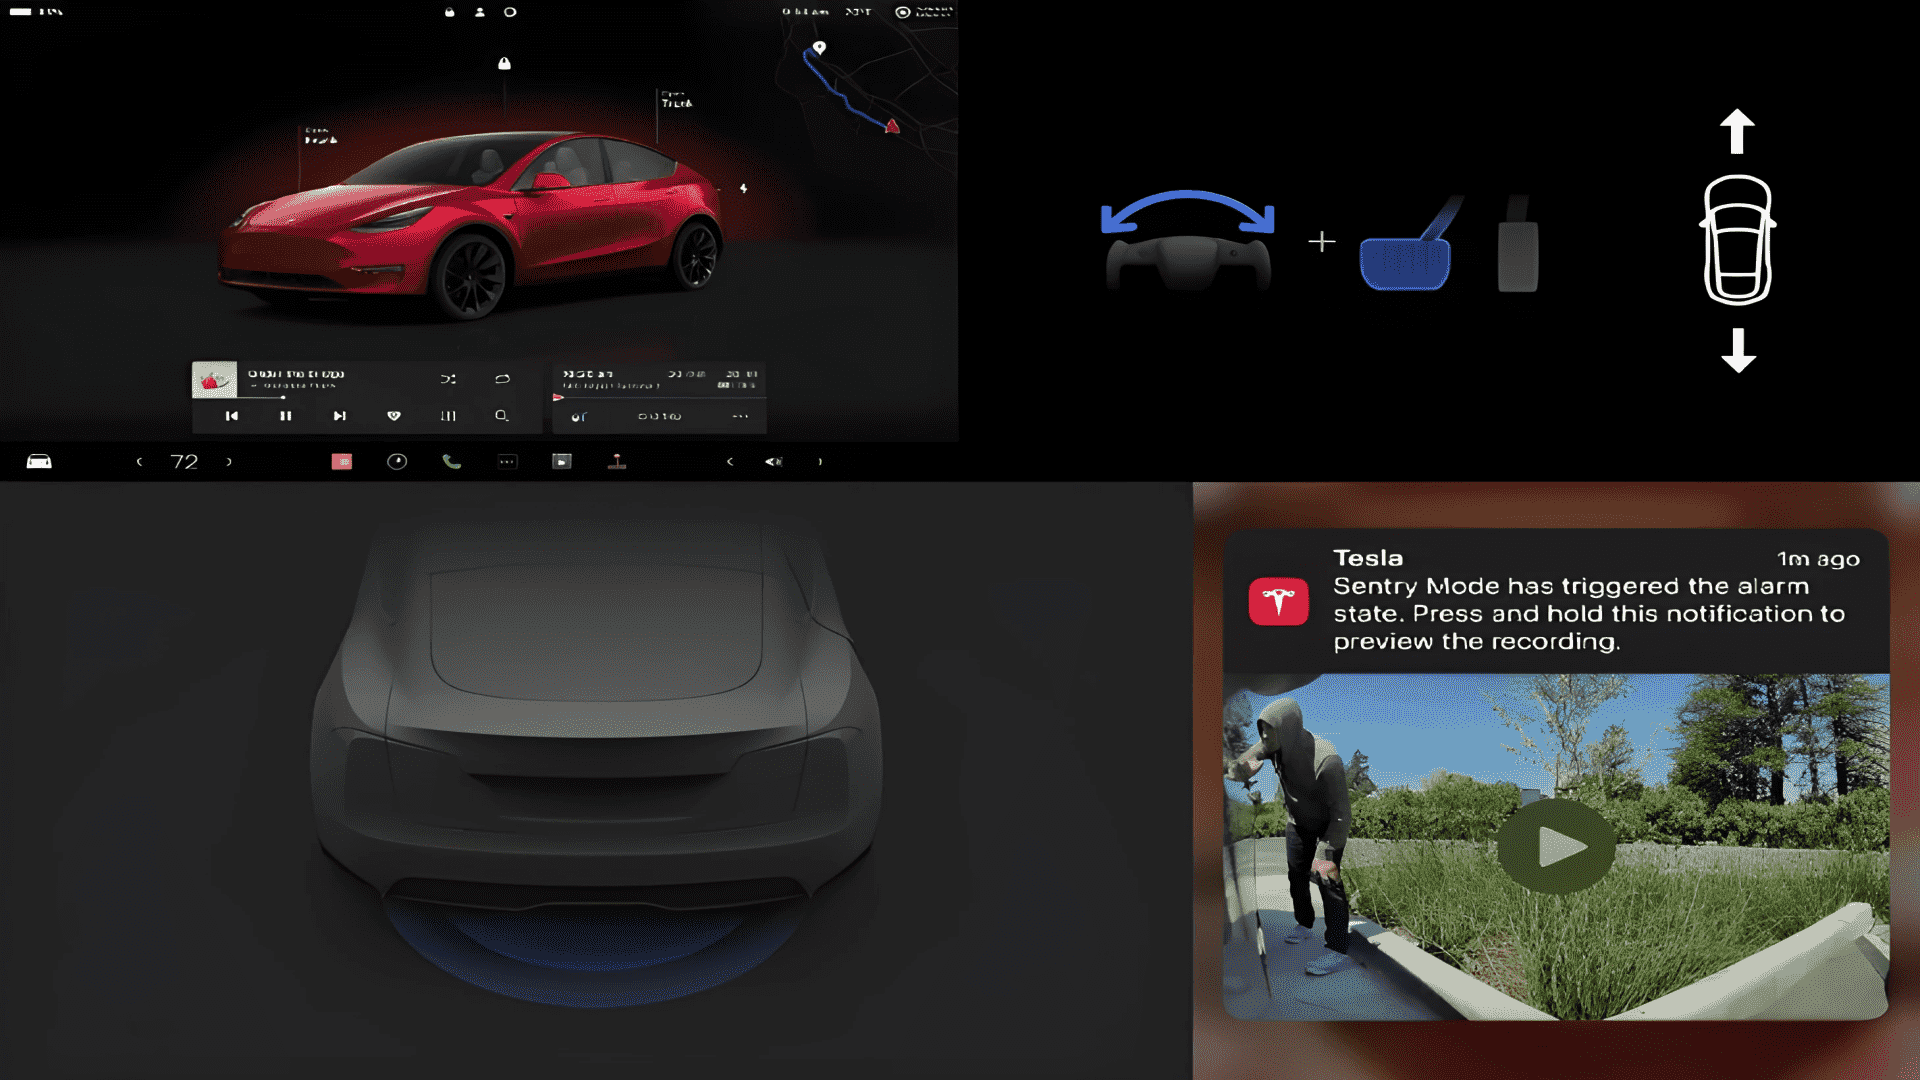 North American Spring Software Update Announcement On Twitter (Credits Tesla)